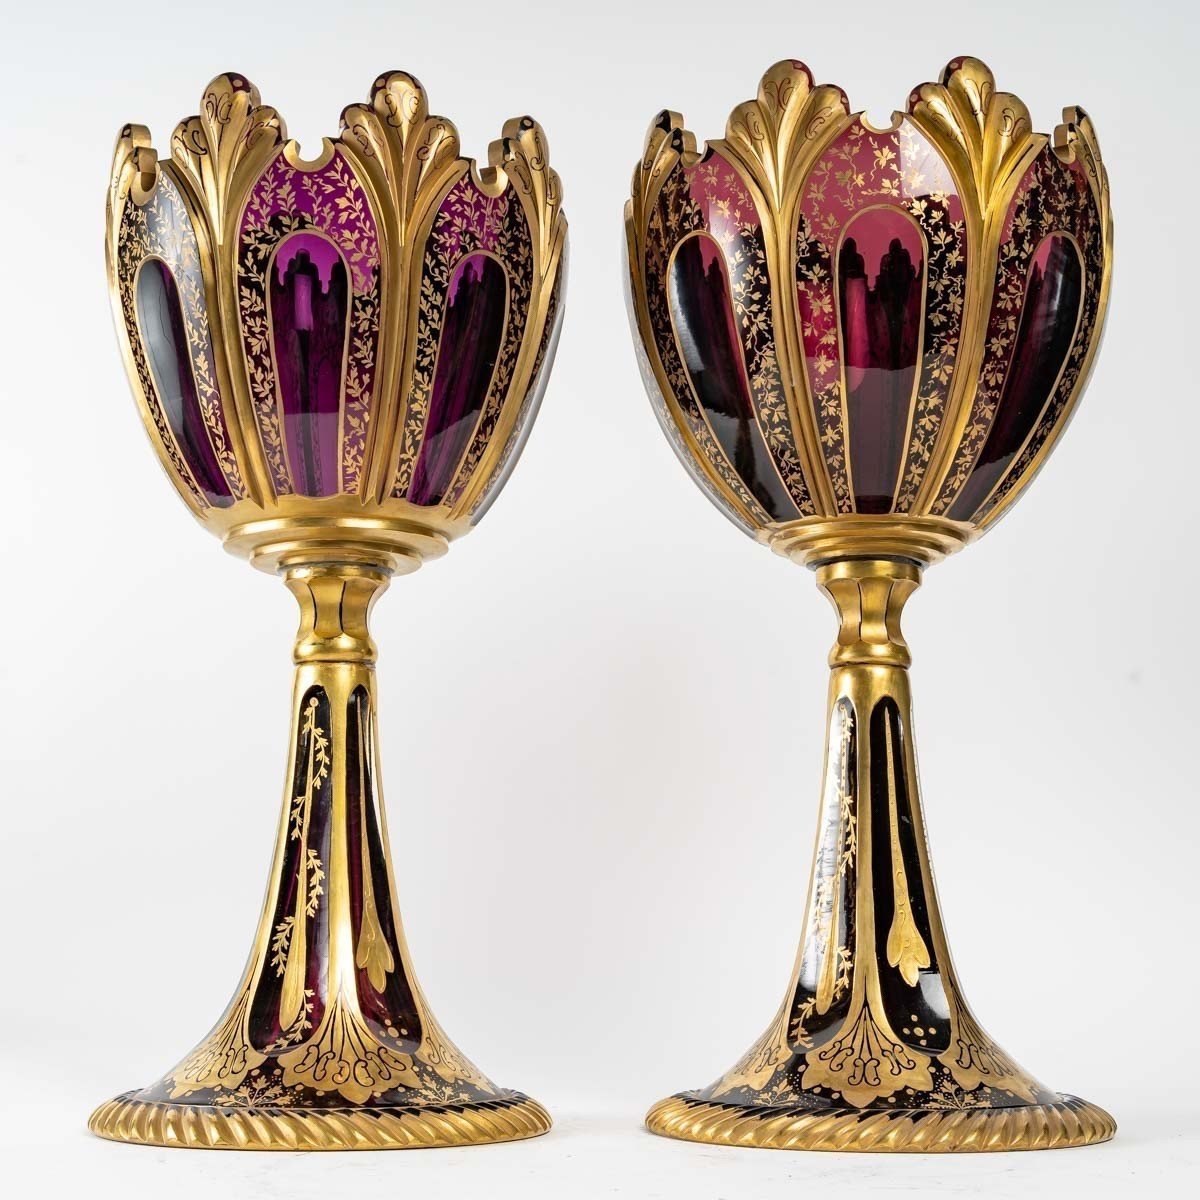 Beautiful Pair Of Bohemian Cups, From The 19th Century